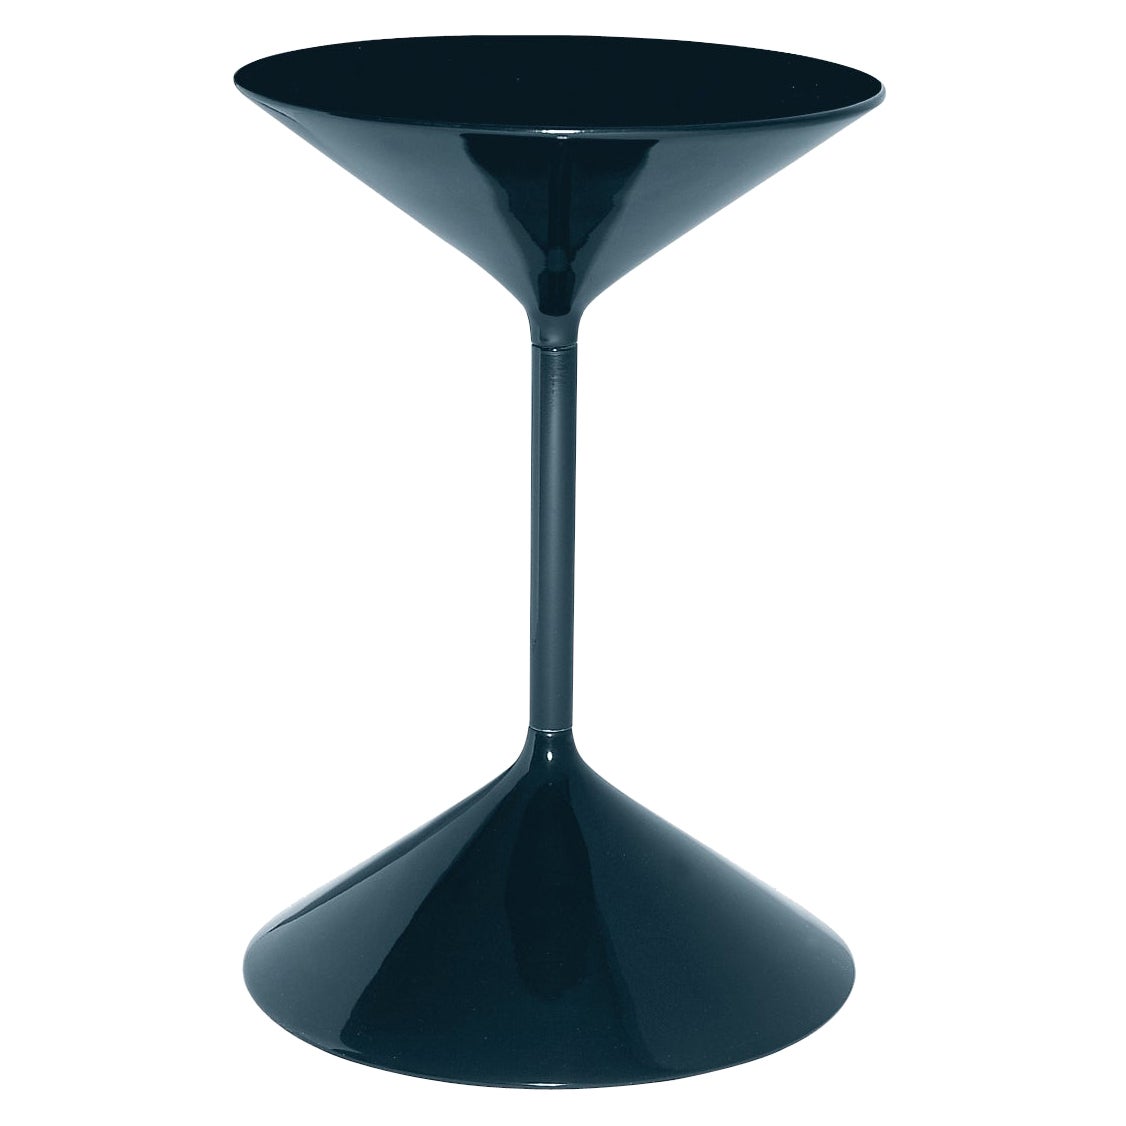 Zanotta Tempo Large Table in Black Finish with Lacquered Top by Prospero Rasulo For Sale